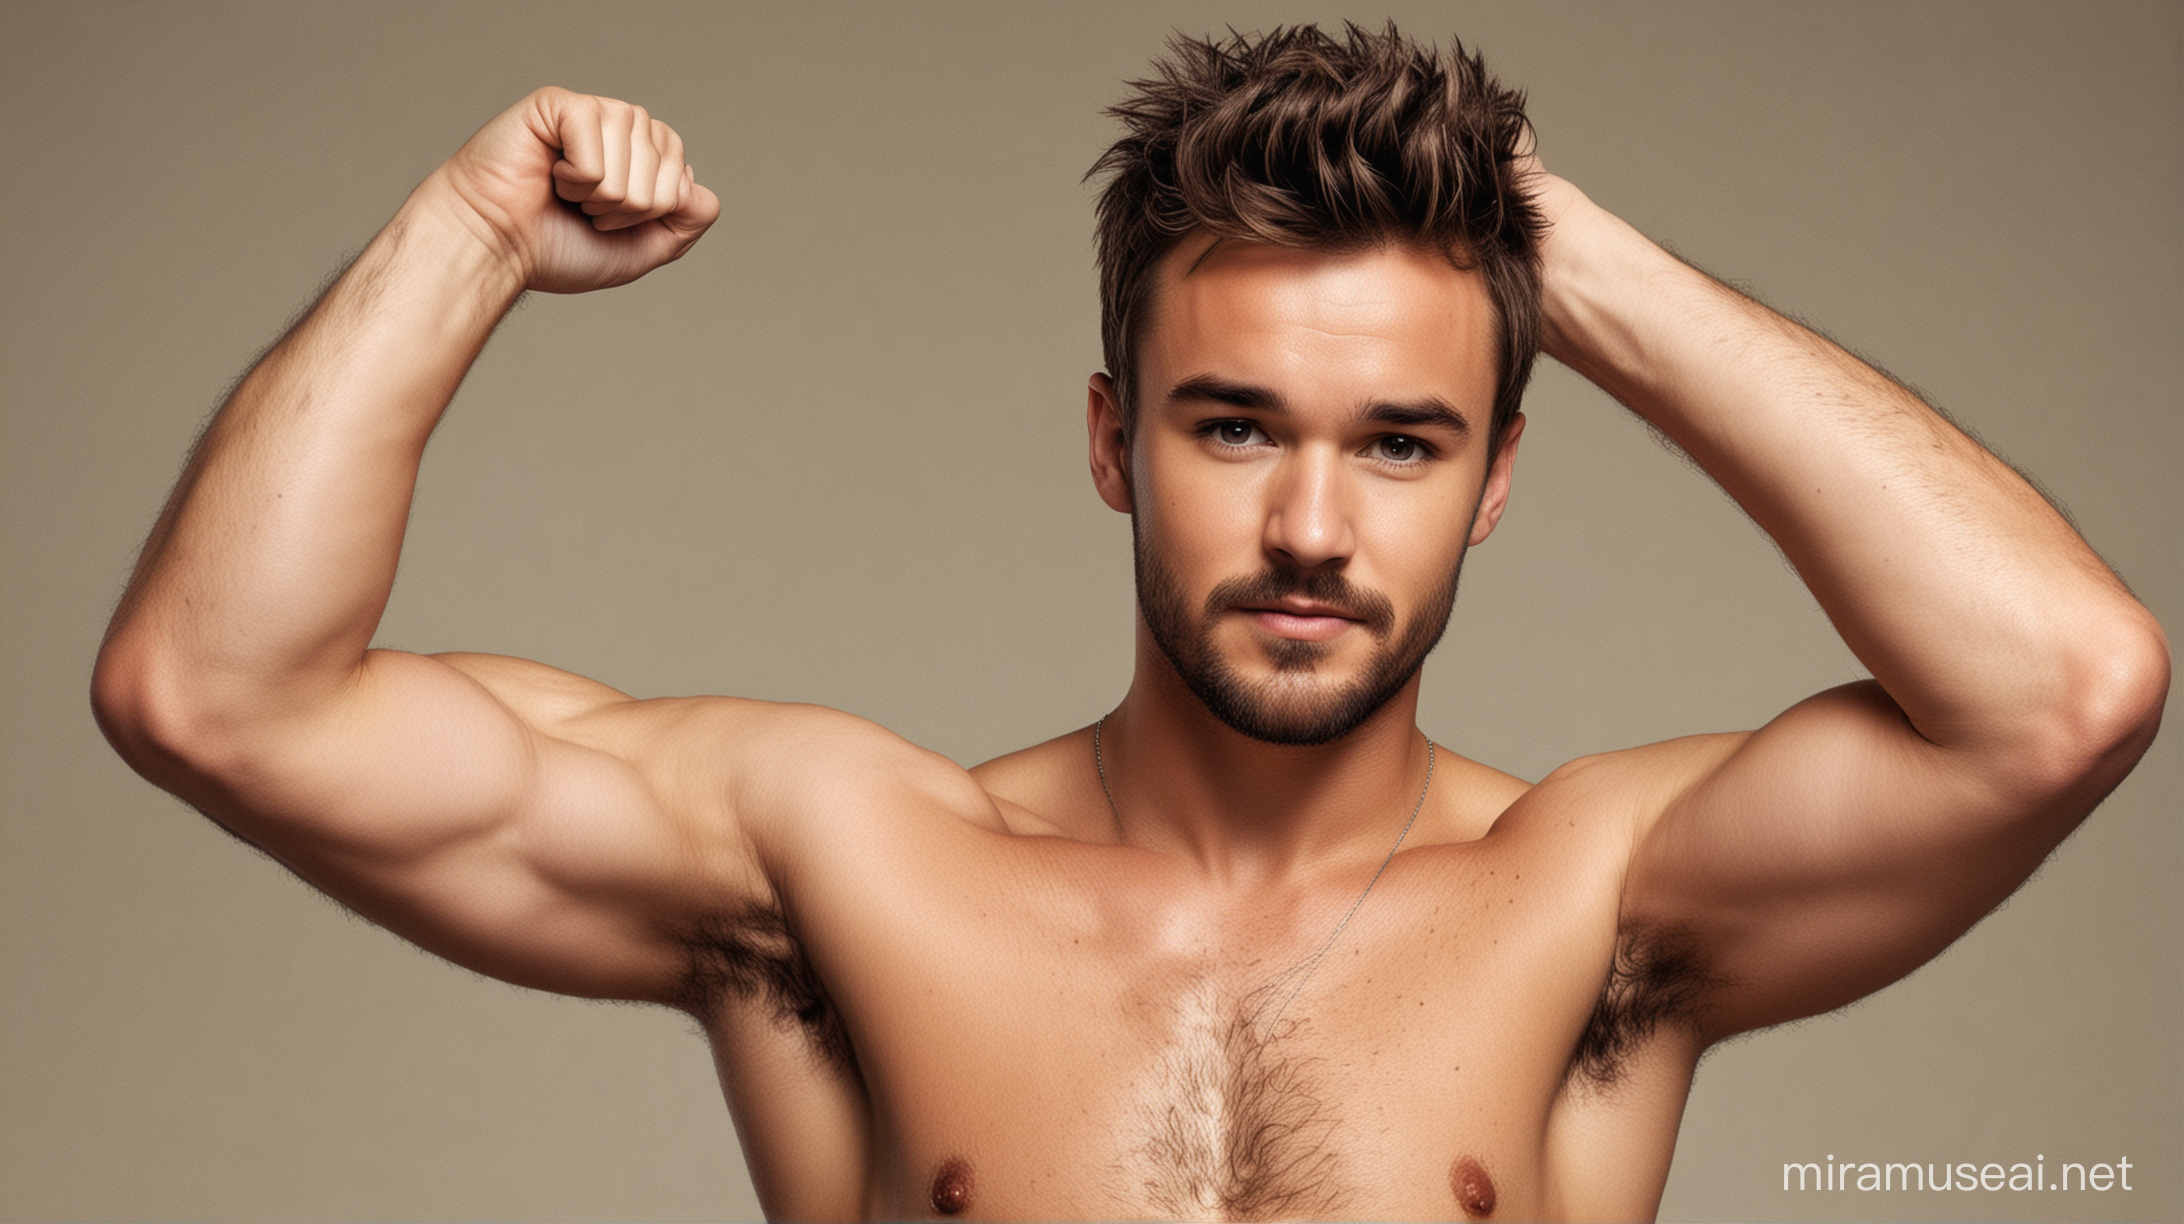 Muscular Liam Payne from One Direction Raises Arms Displaying Strength and Hairy Chest